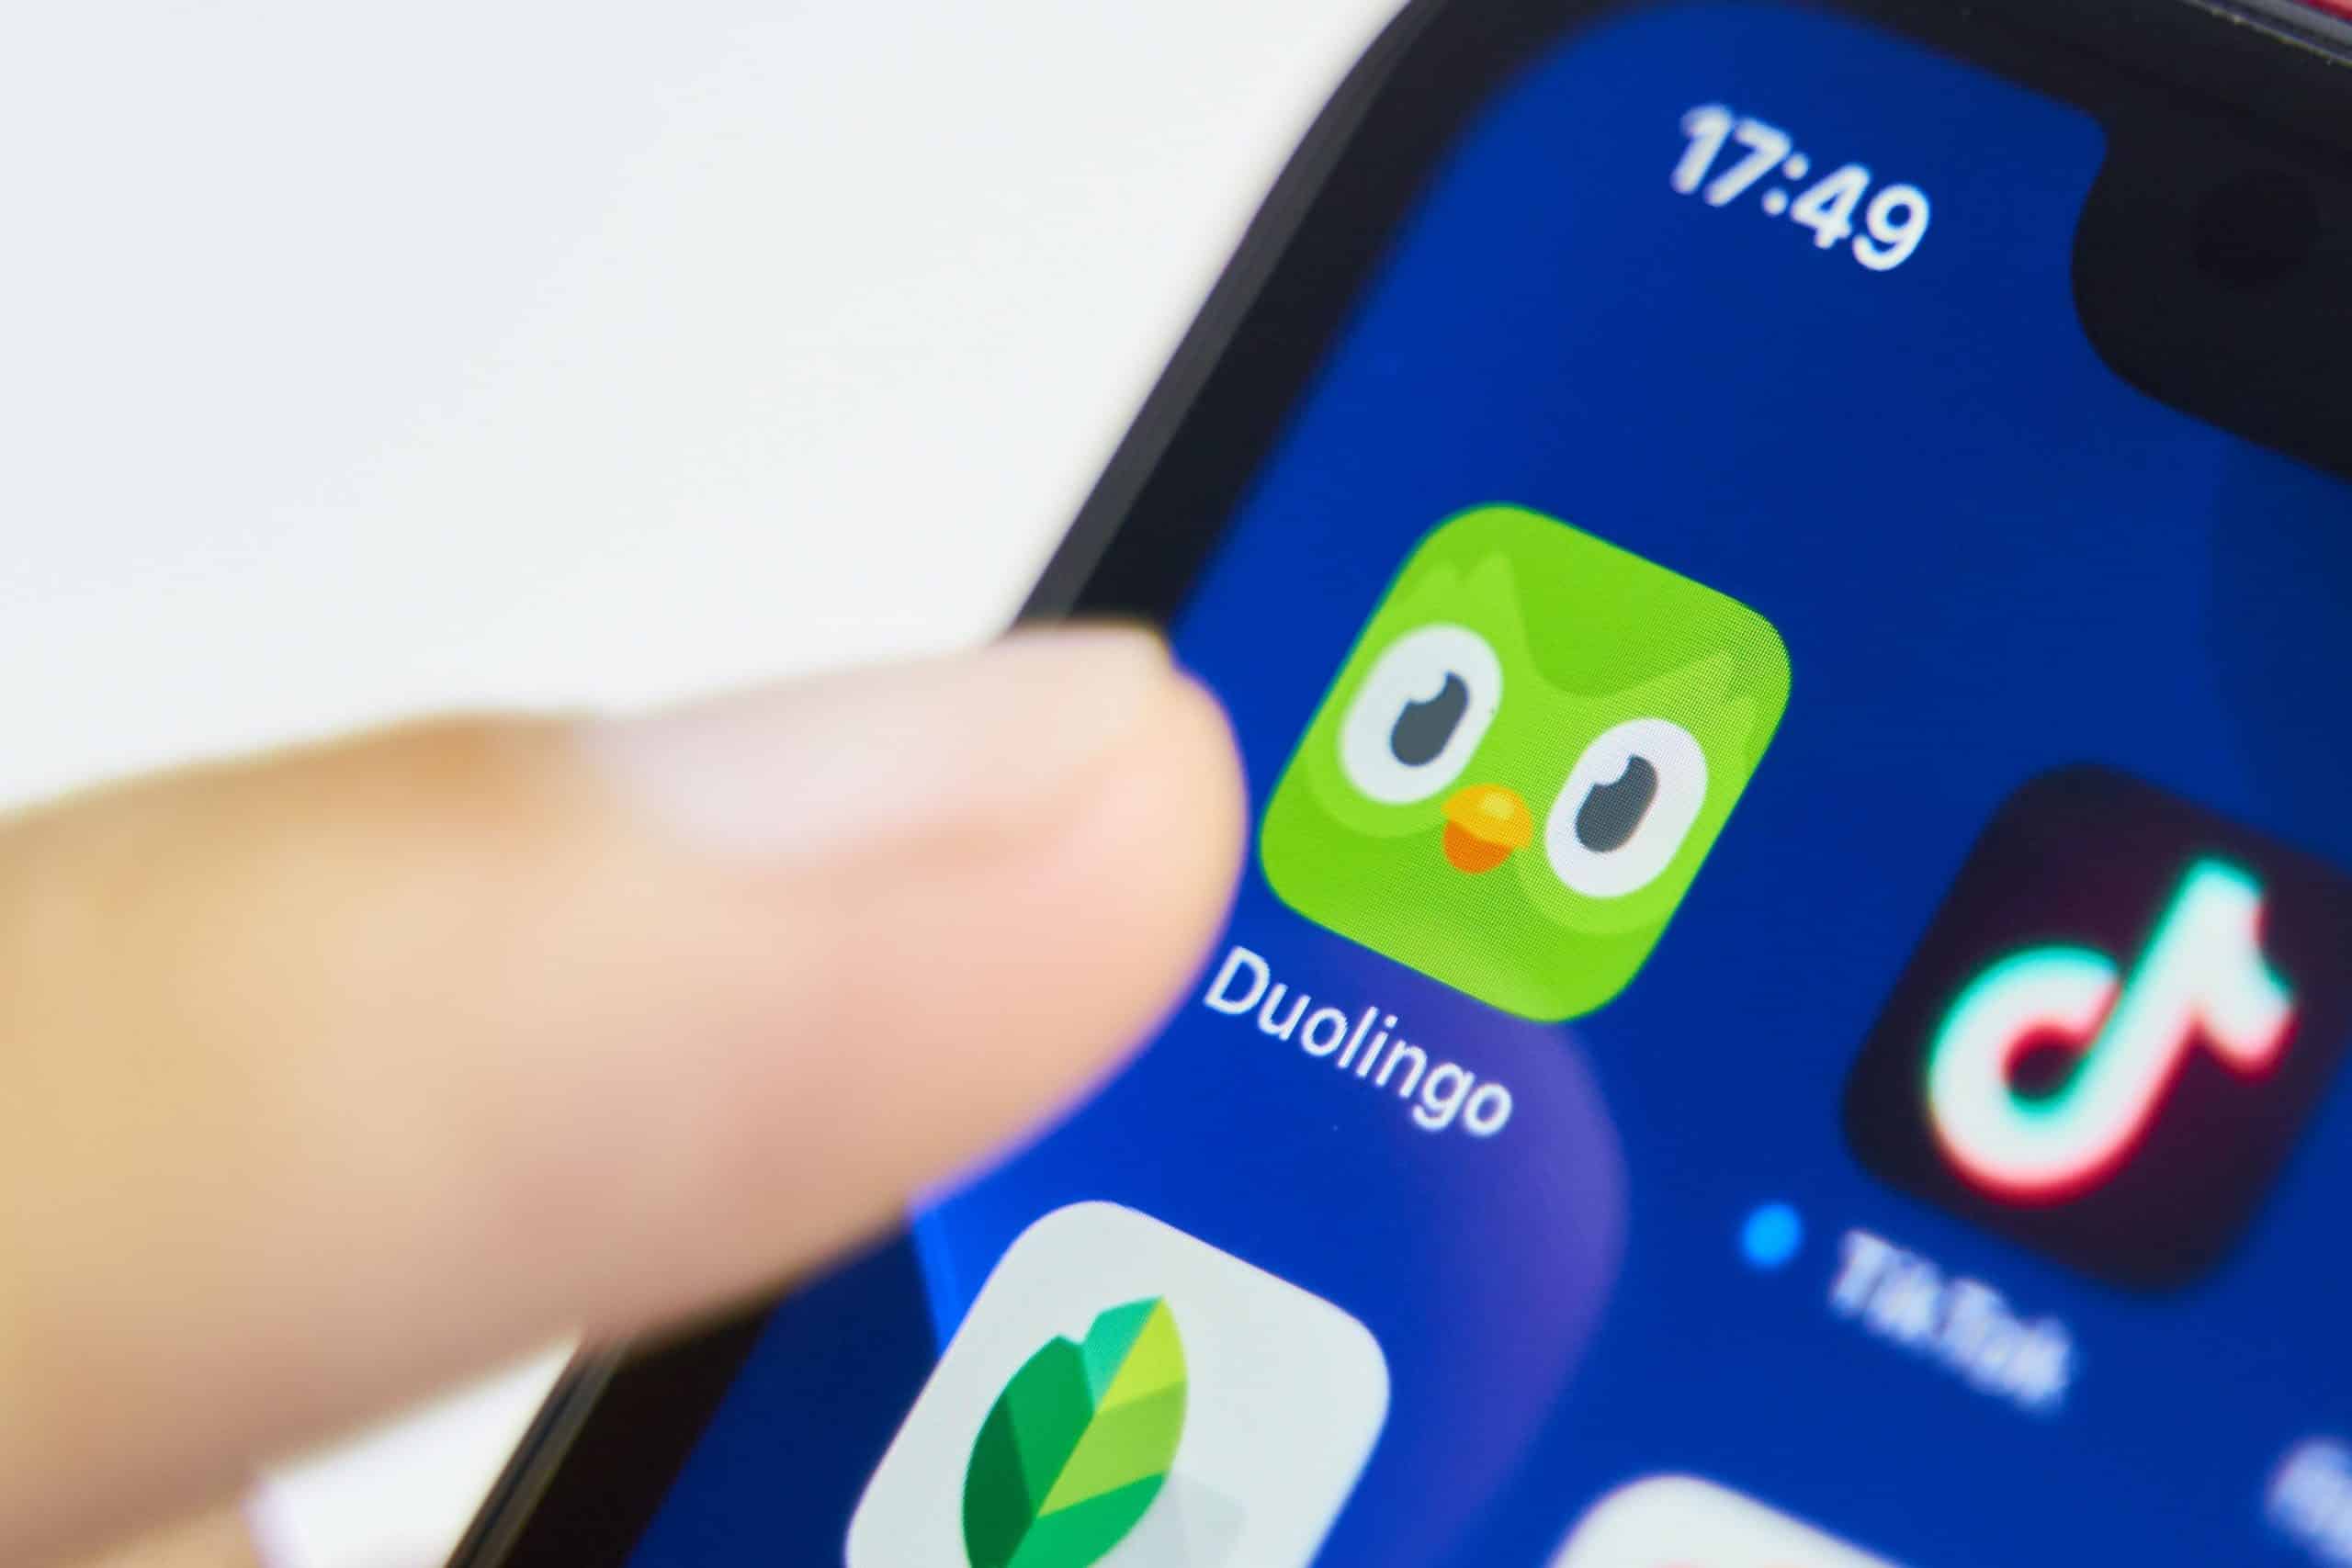 is Duolingo good for learning languages header image featuring a finger tapping onto the Duolingo app icon.